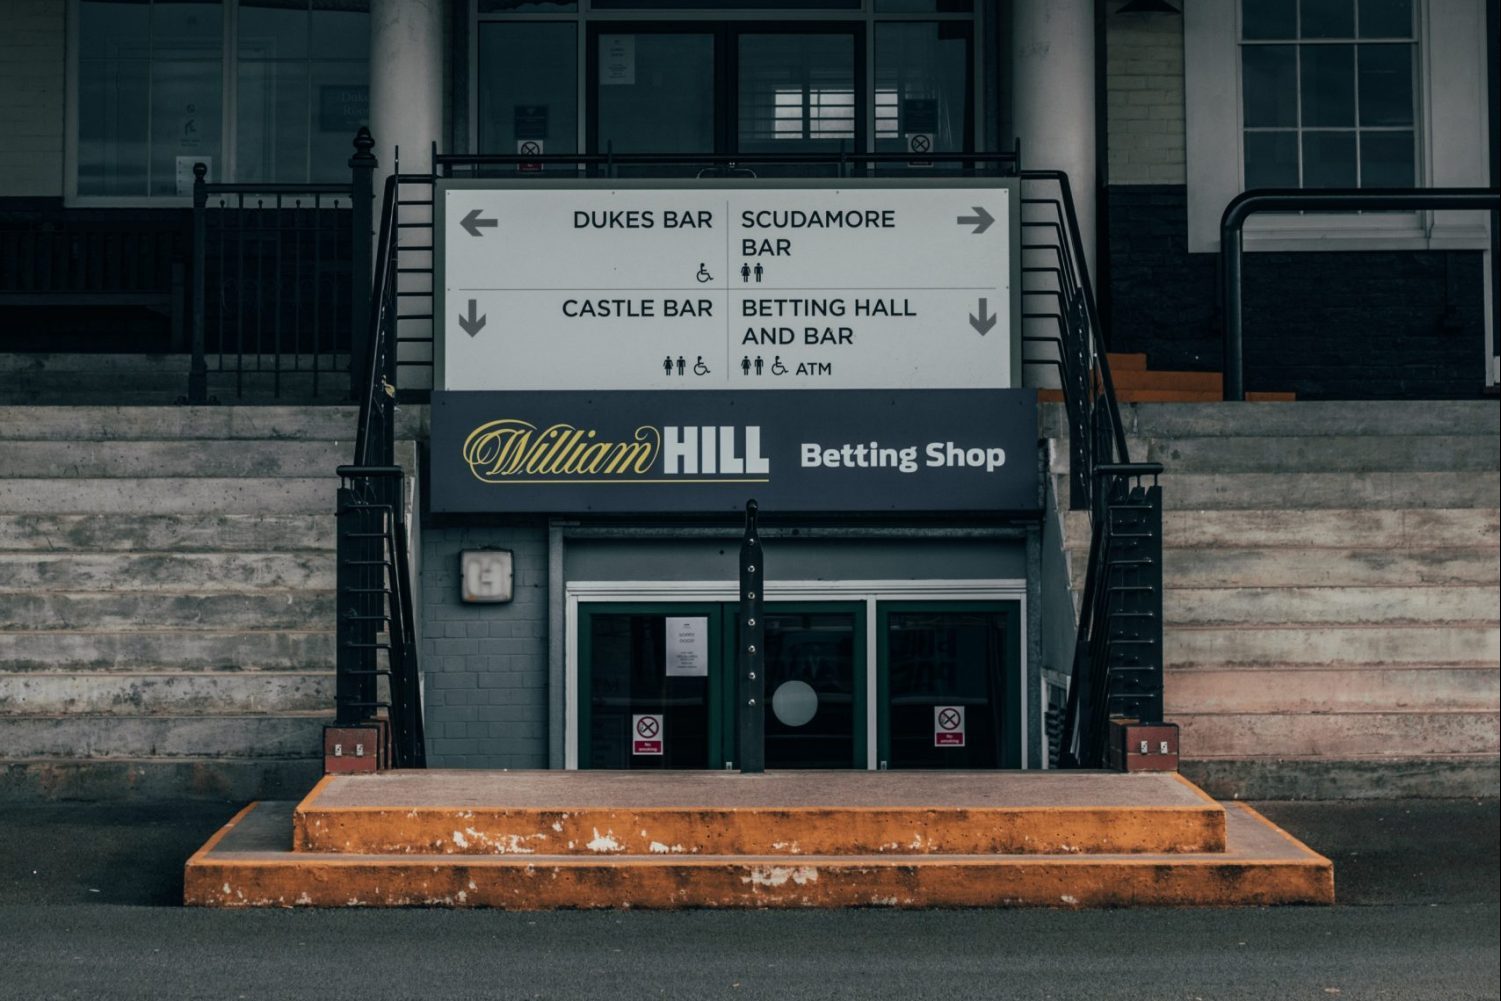 William Hill betting shop in an article about bookmakers